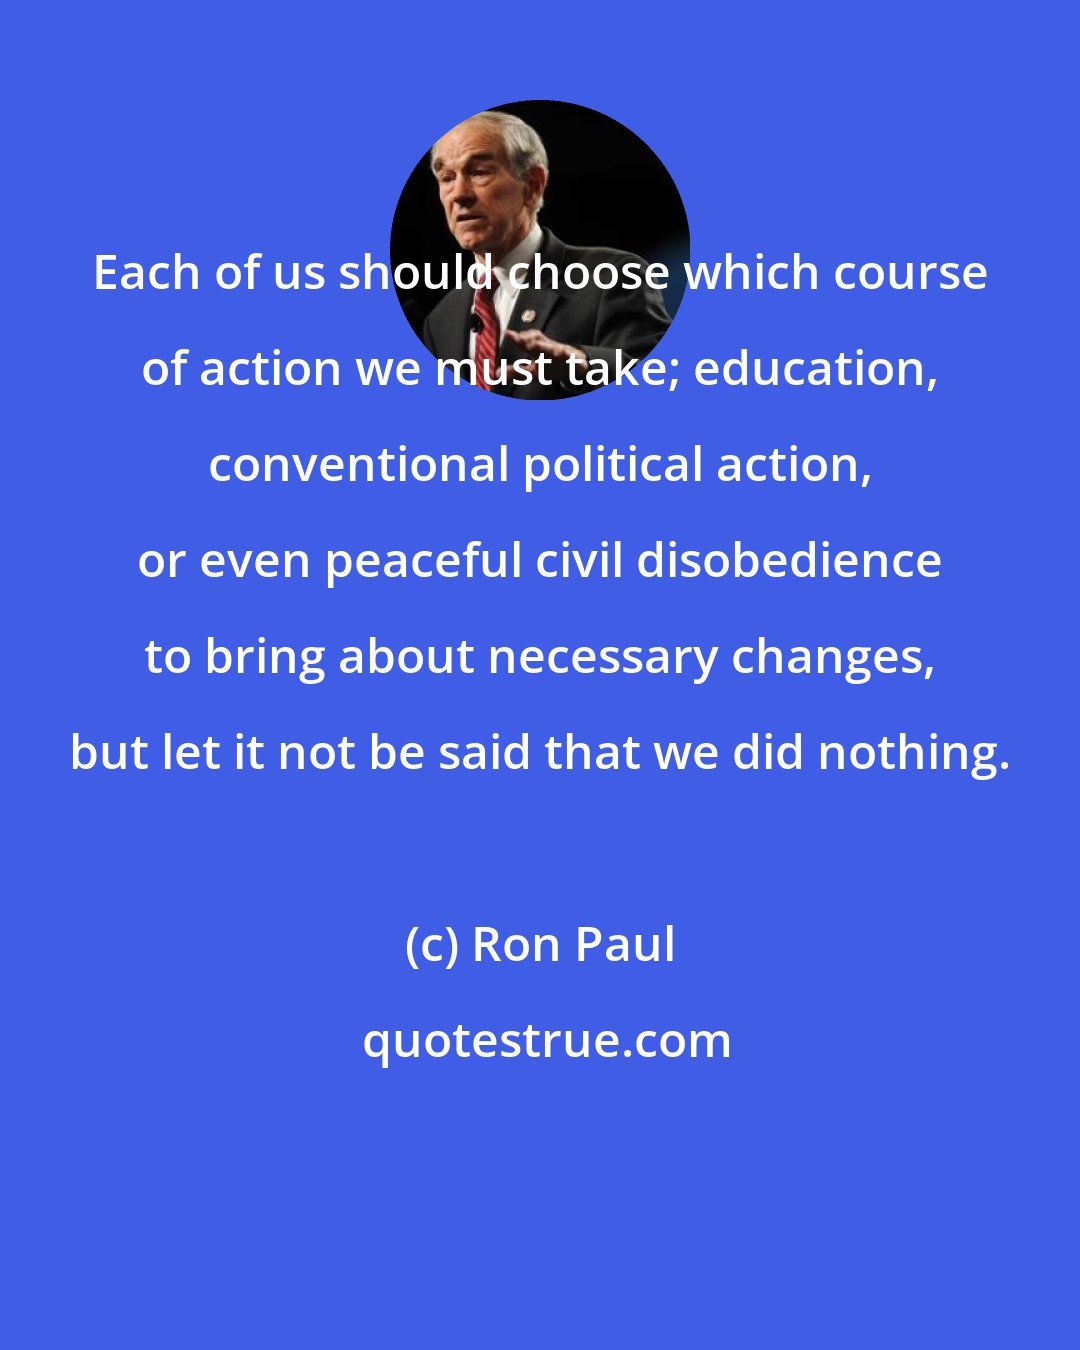 Ron Paul: Each of us should choose which course of action we must take; education, conventional political action, or even peaceful civil disobedience to bring about necessary changes, but let it not be said that we did nothing.